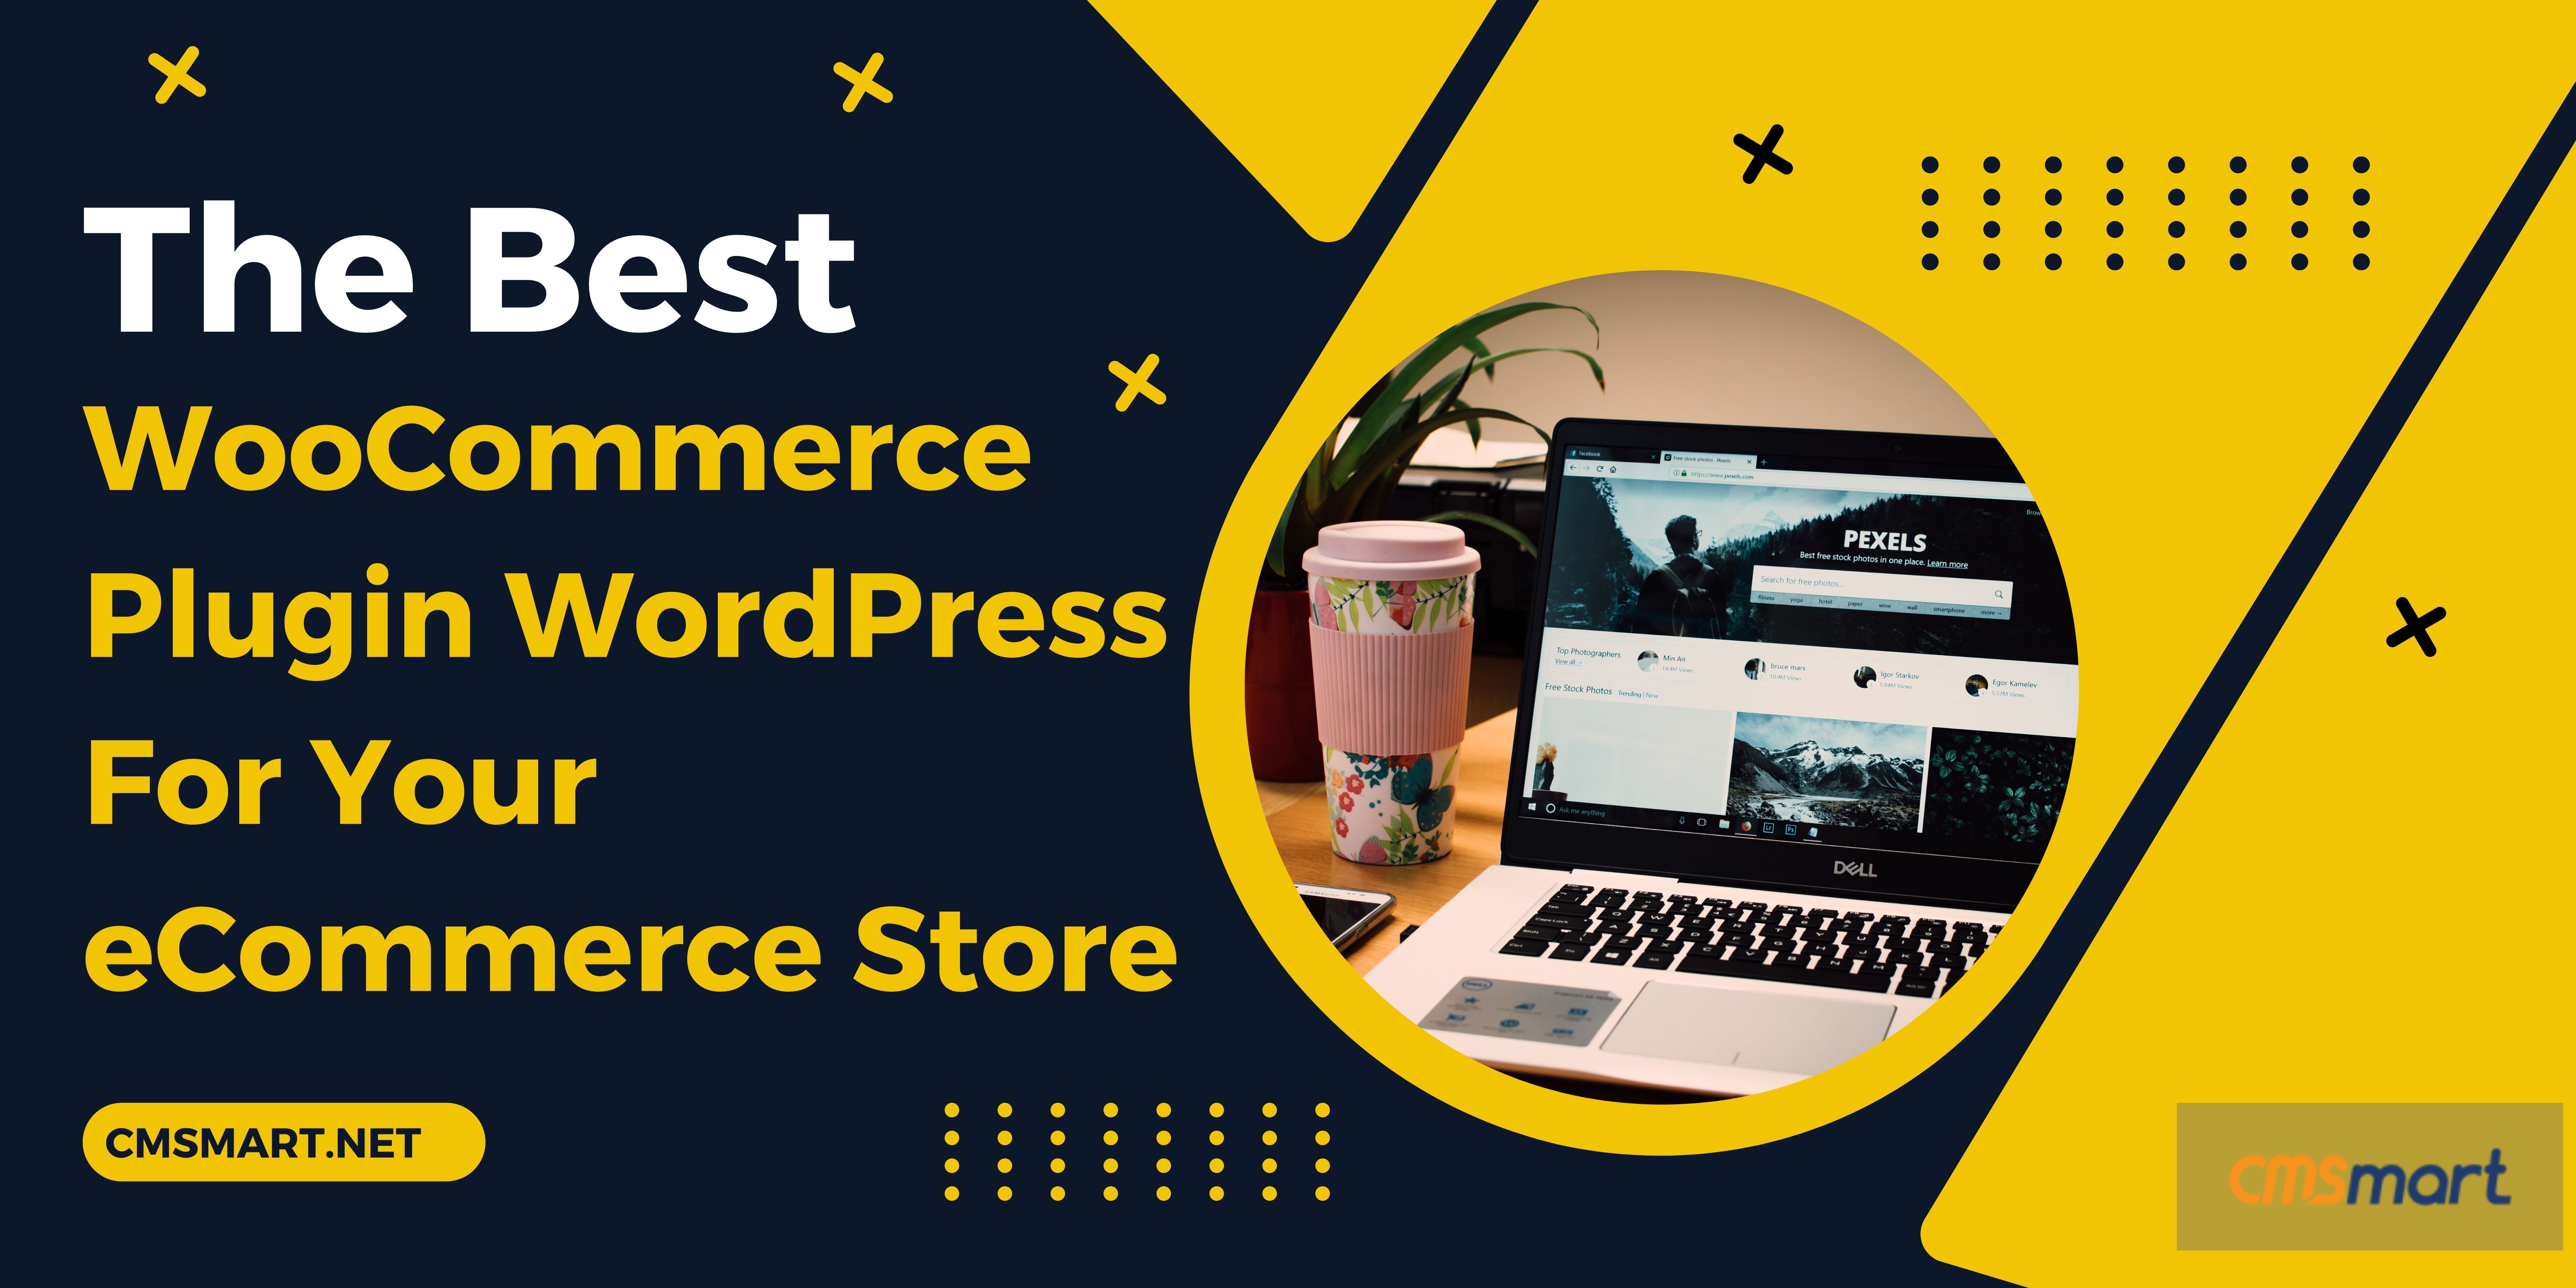 The Best WooCommerce Plugin WordPress for Your Ecommerce Store